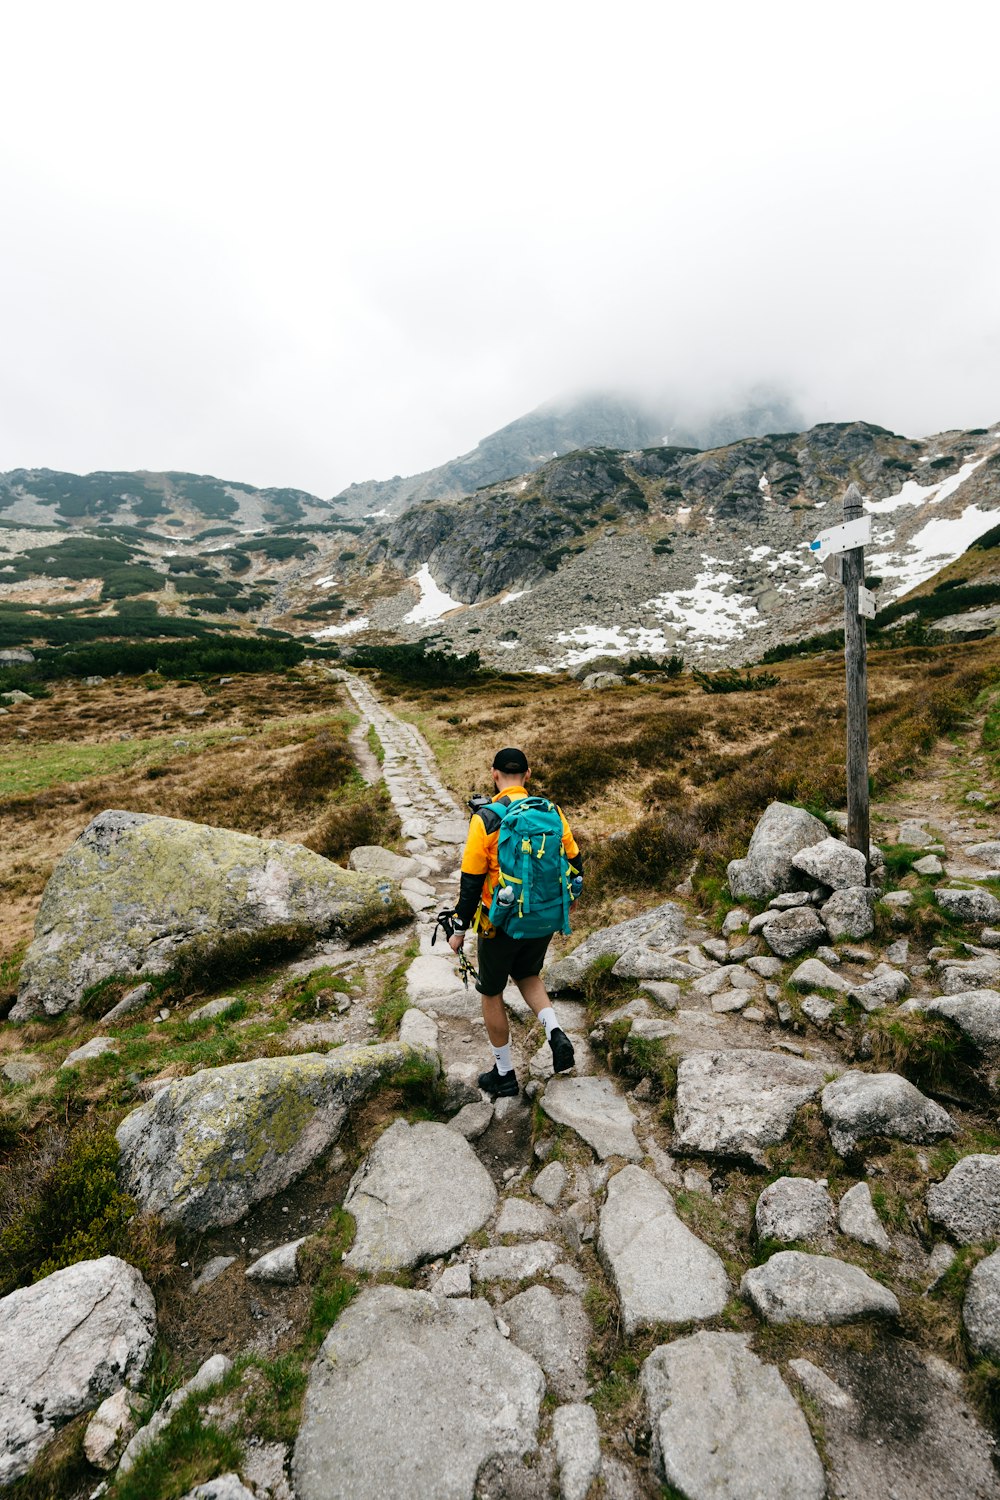 a man hiking up a rocky path in the mountains